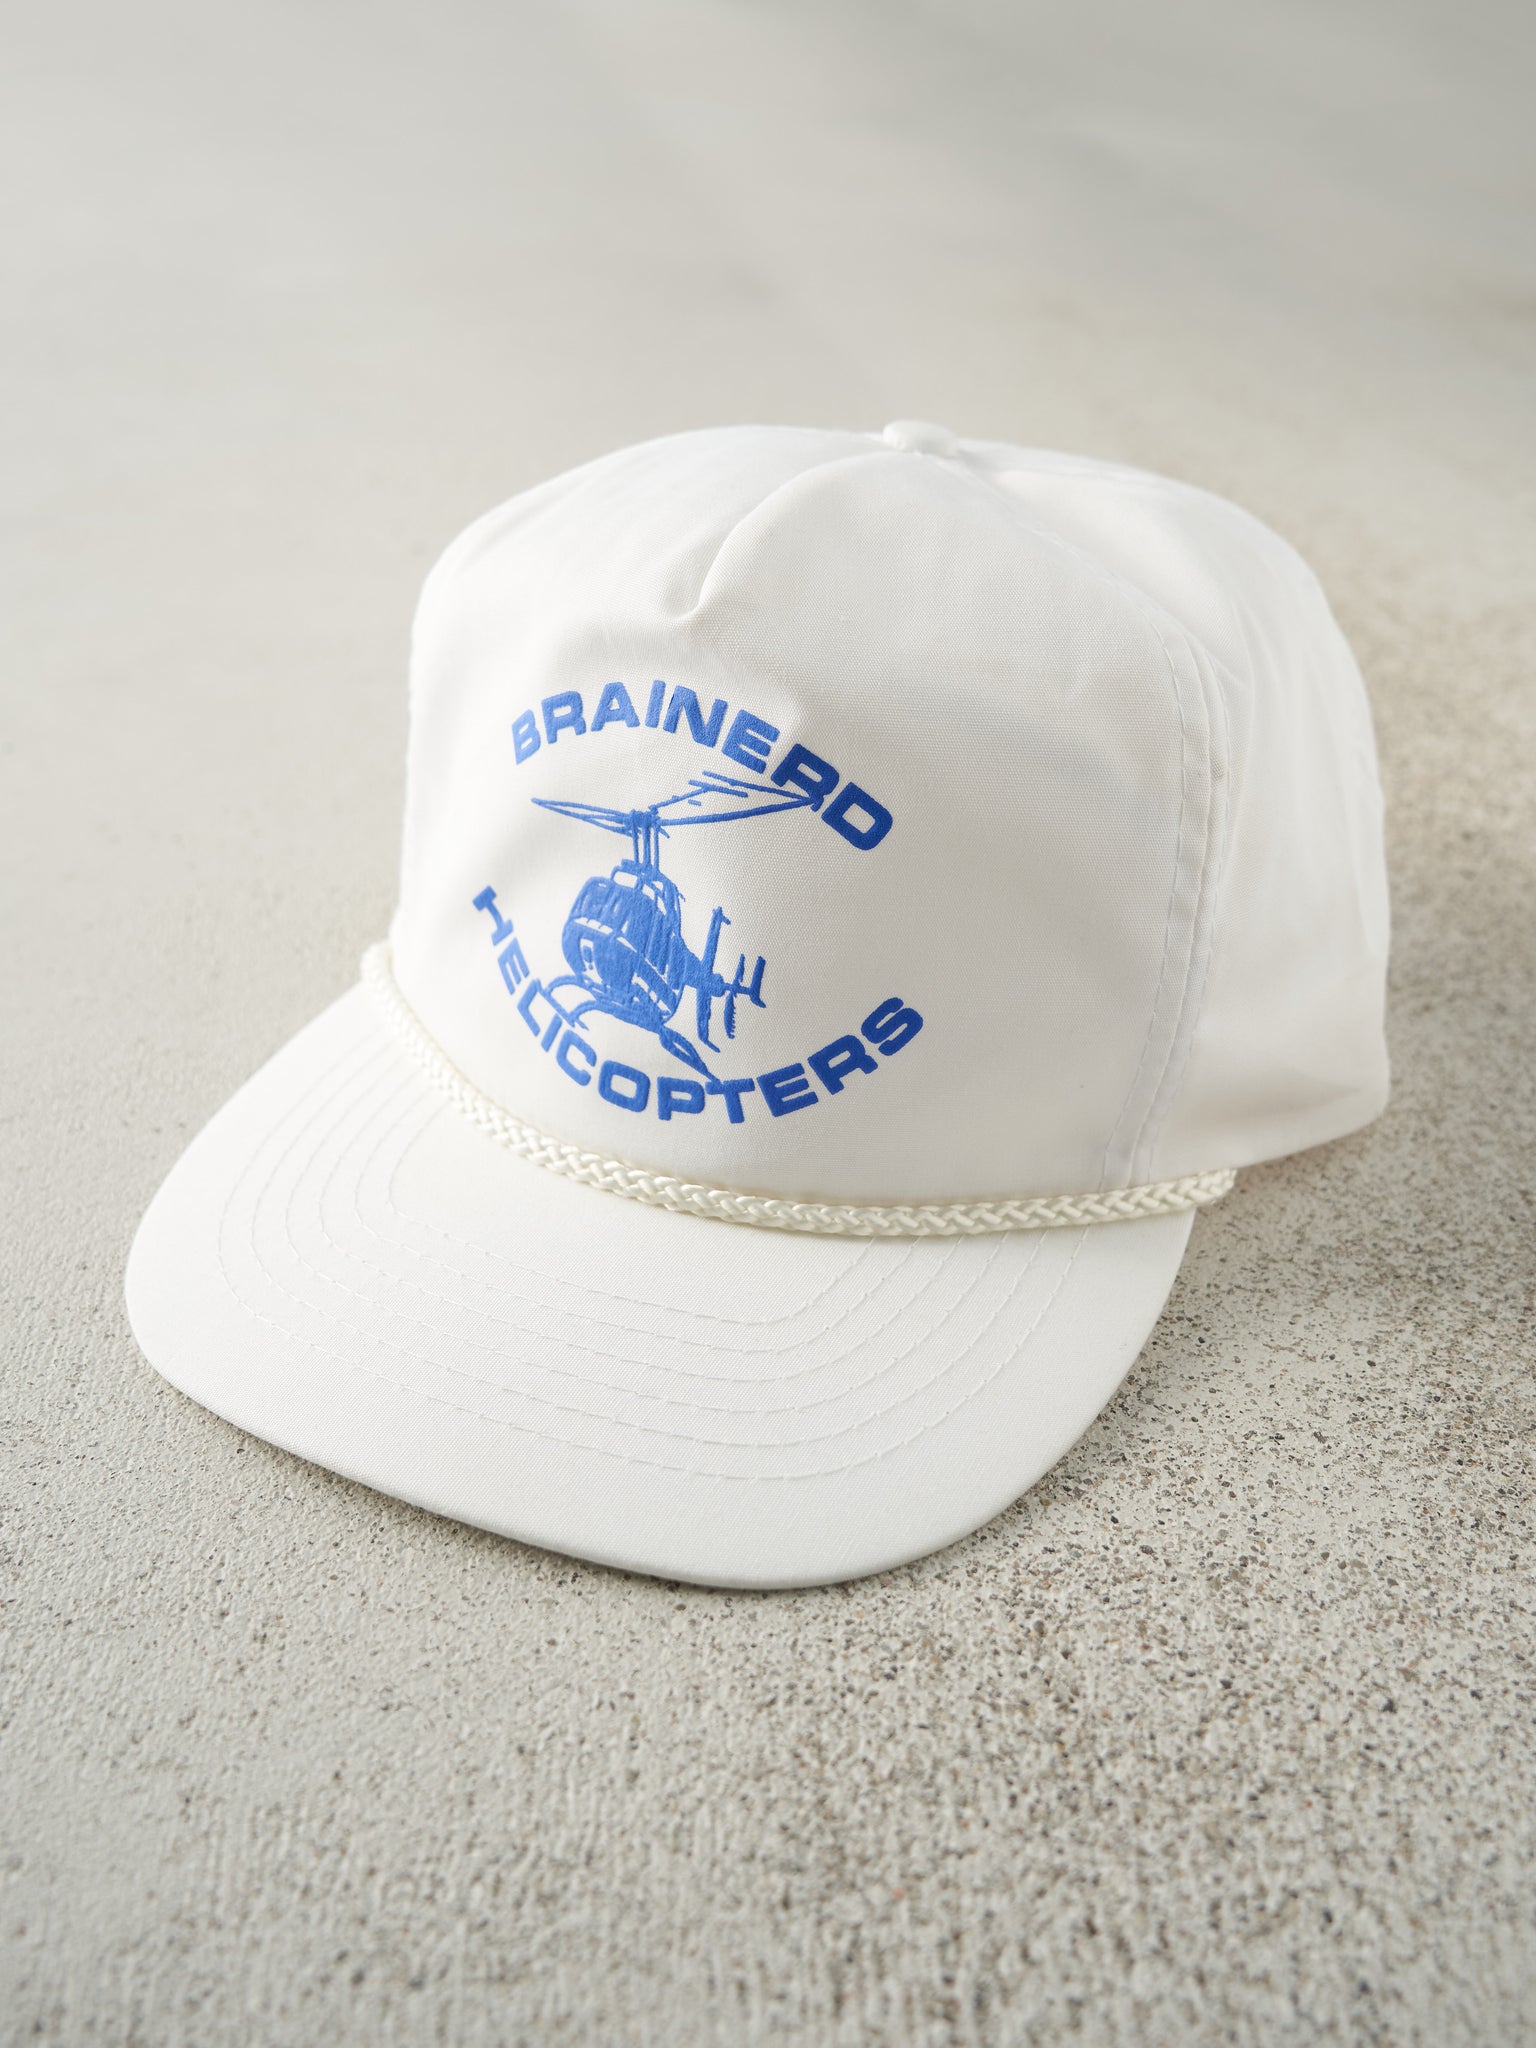 Vintage 80s White Brainerd Helicopters Zip Back Hat